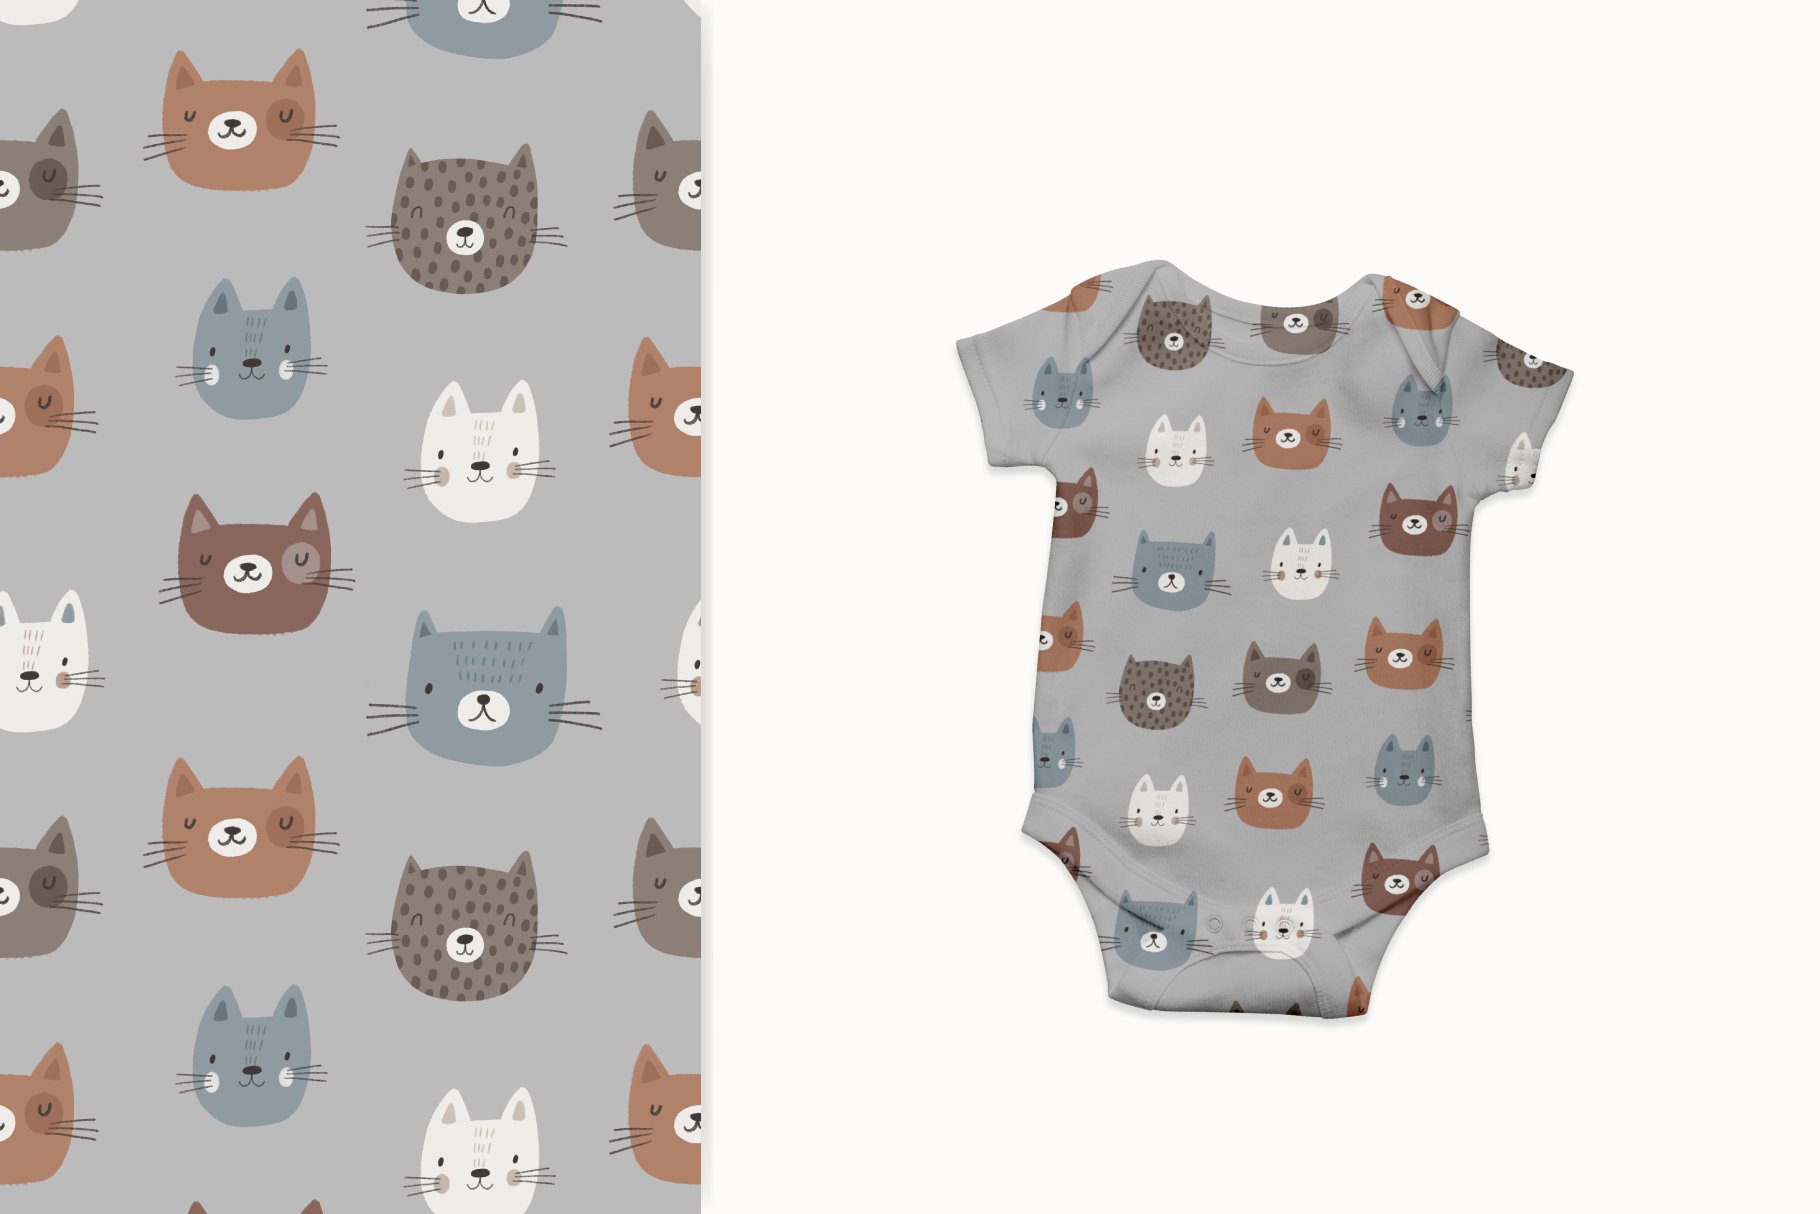 So cute cats illustration on the baby clothe.